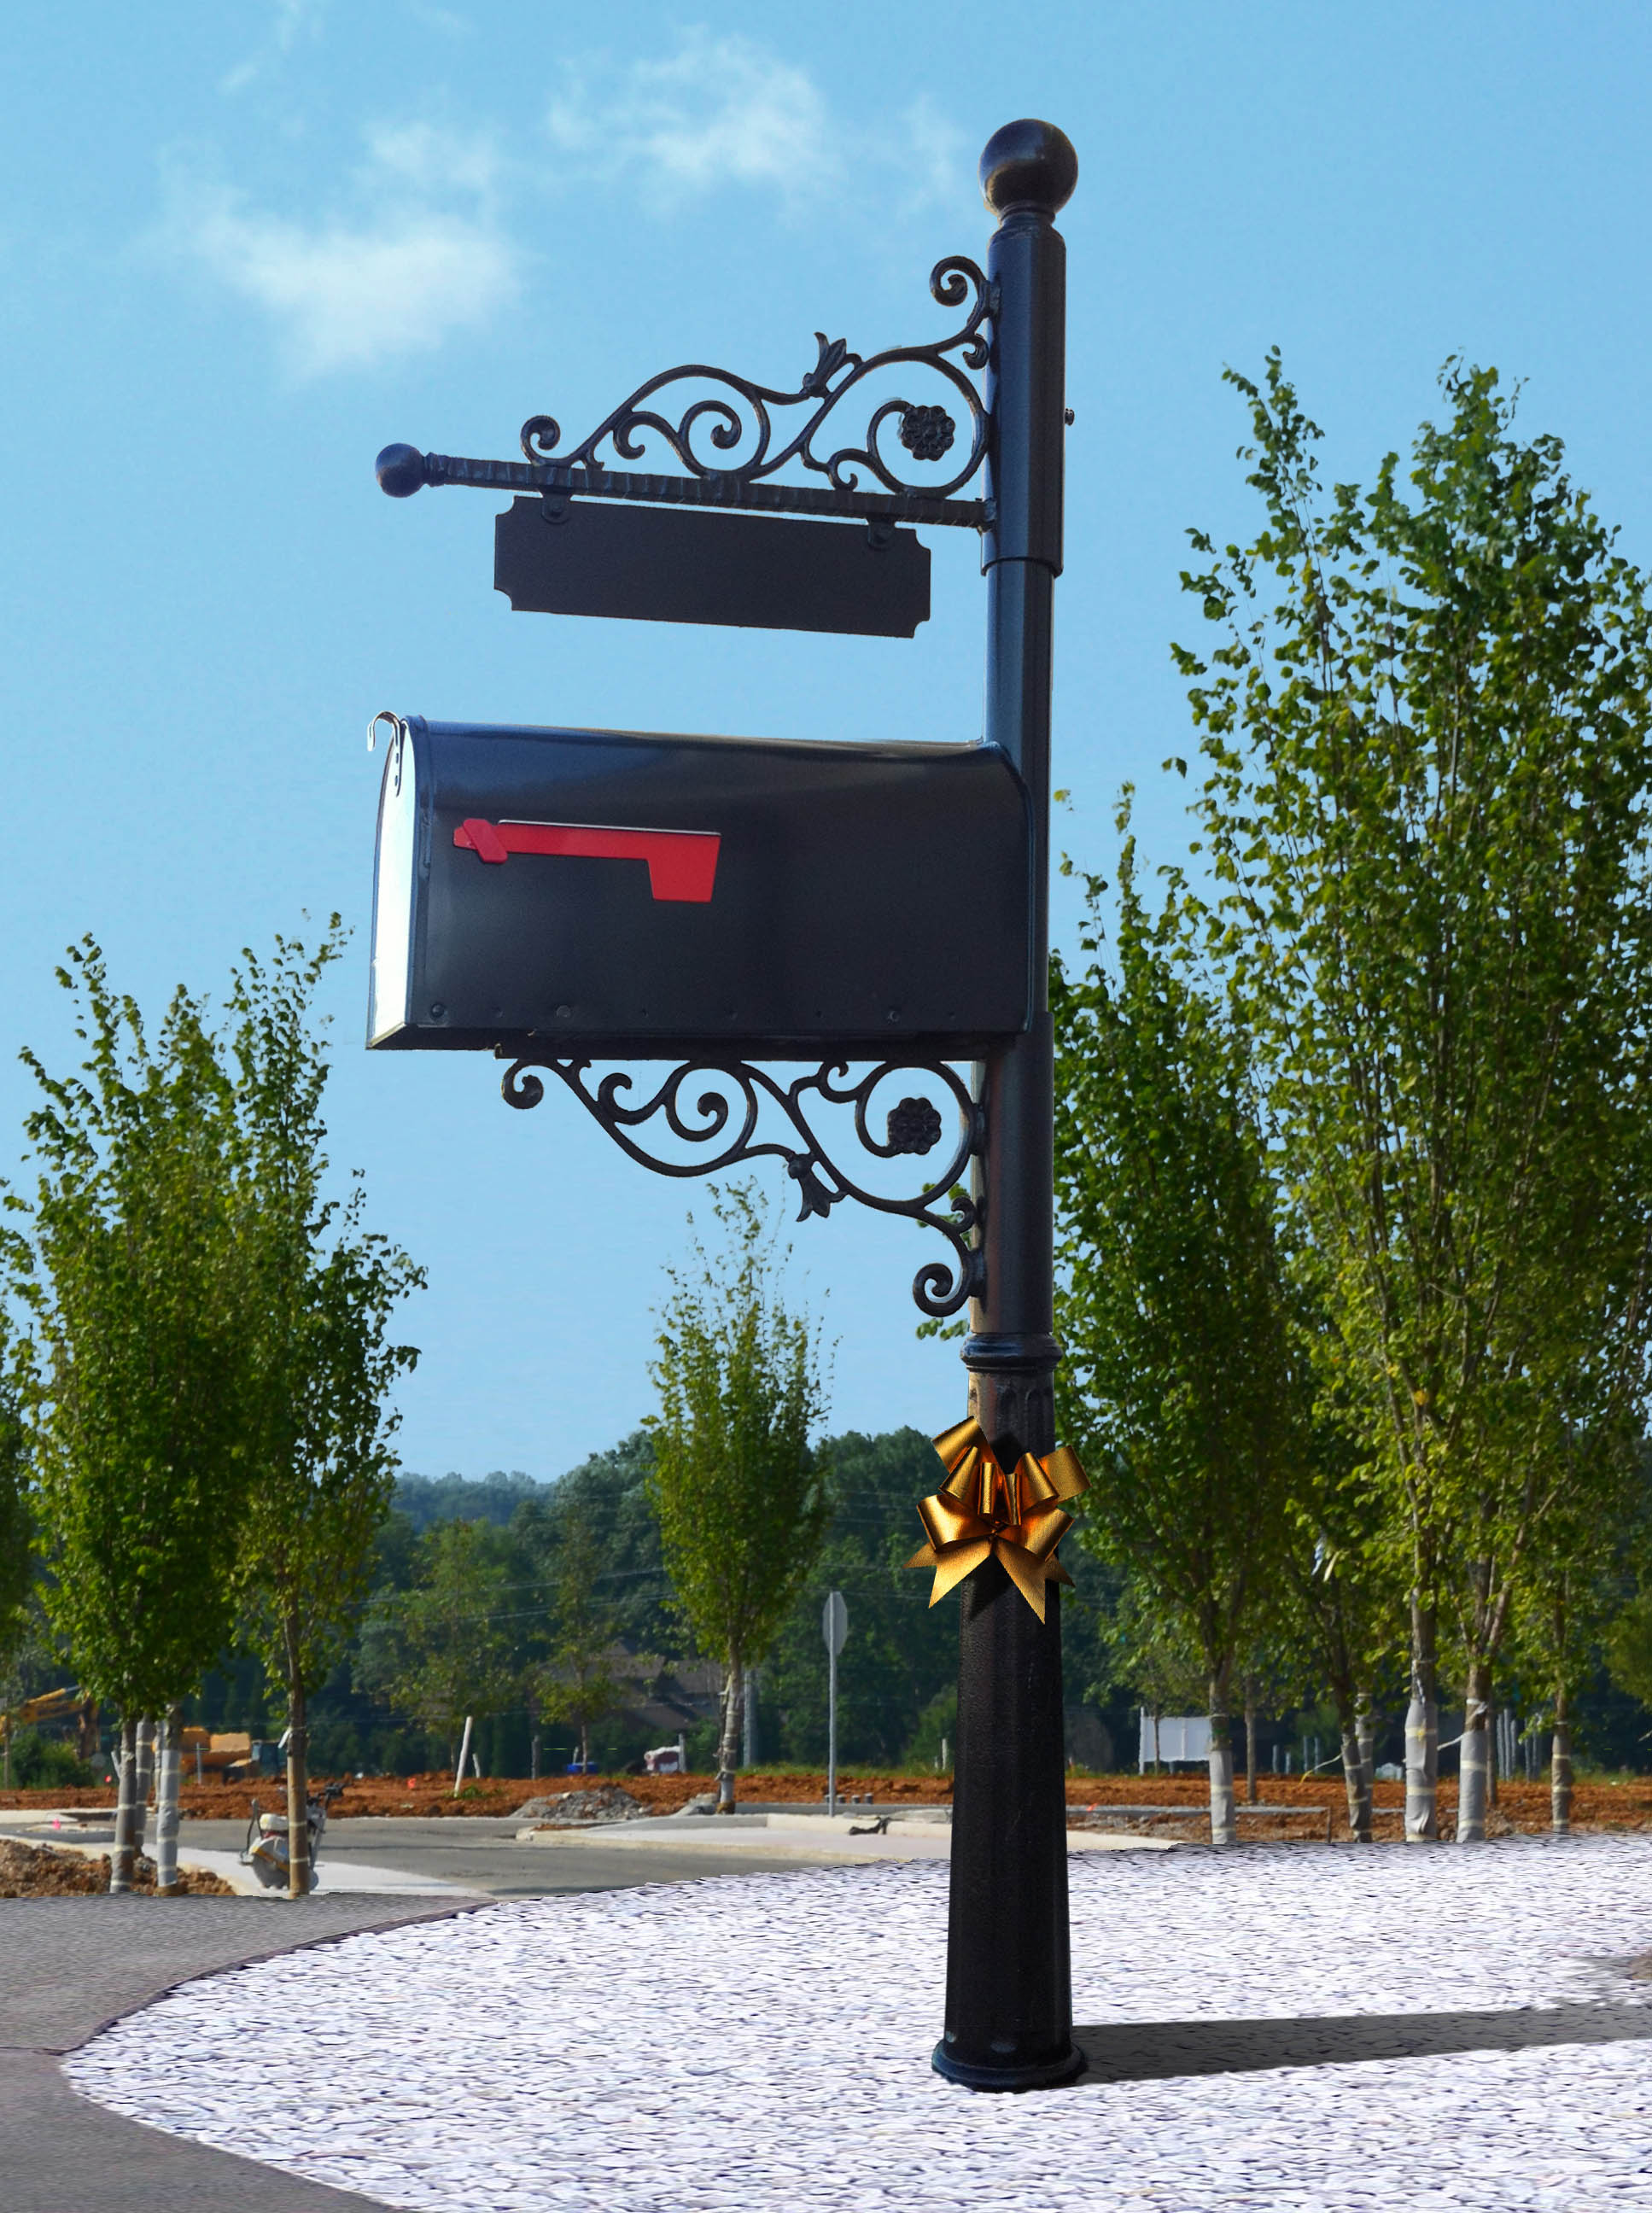 The New Mailboxes - a gift to LENDON homeowners